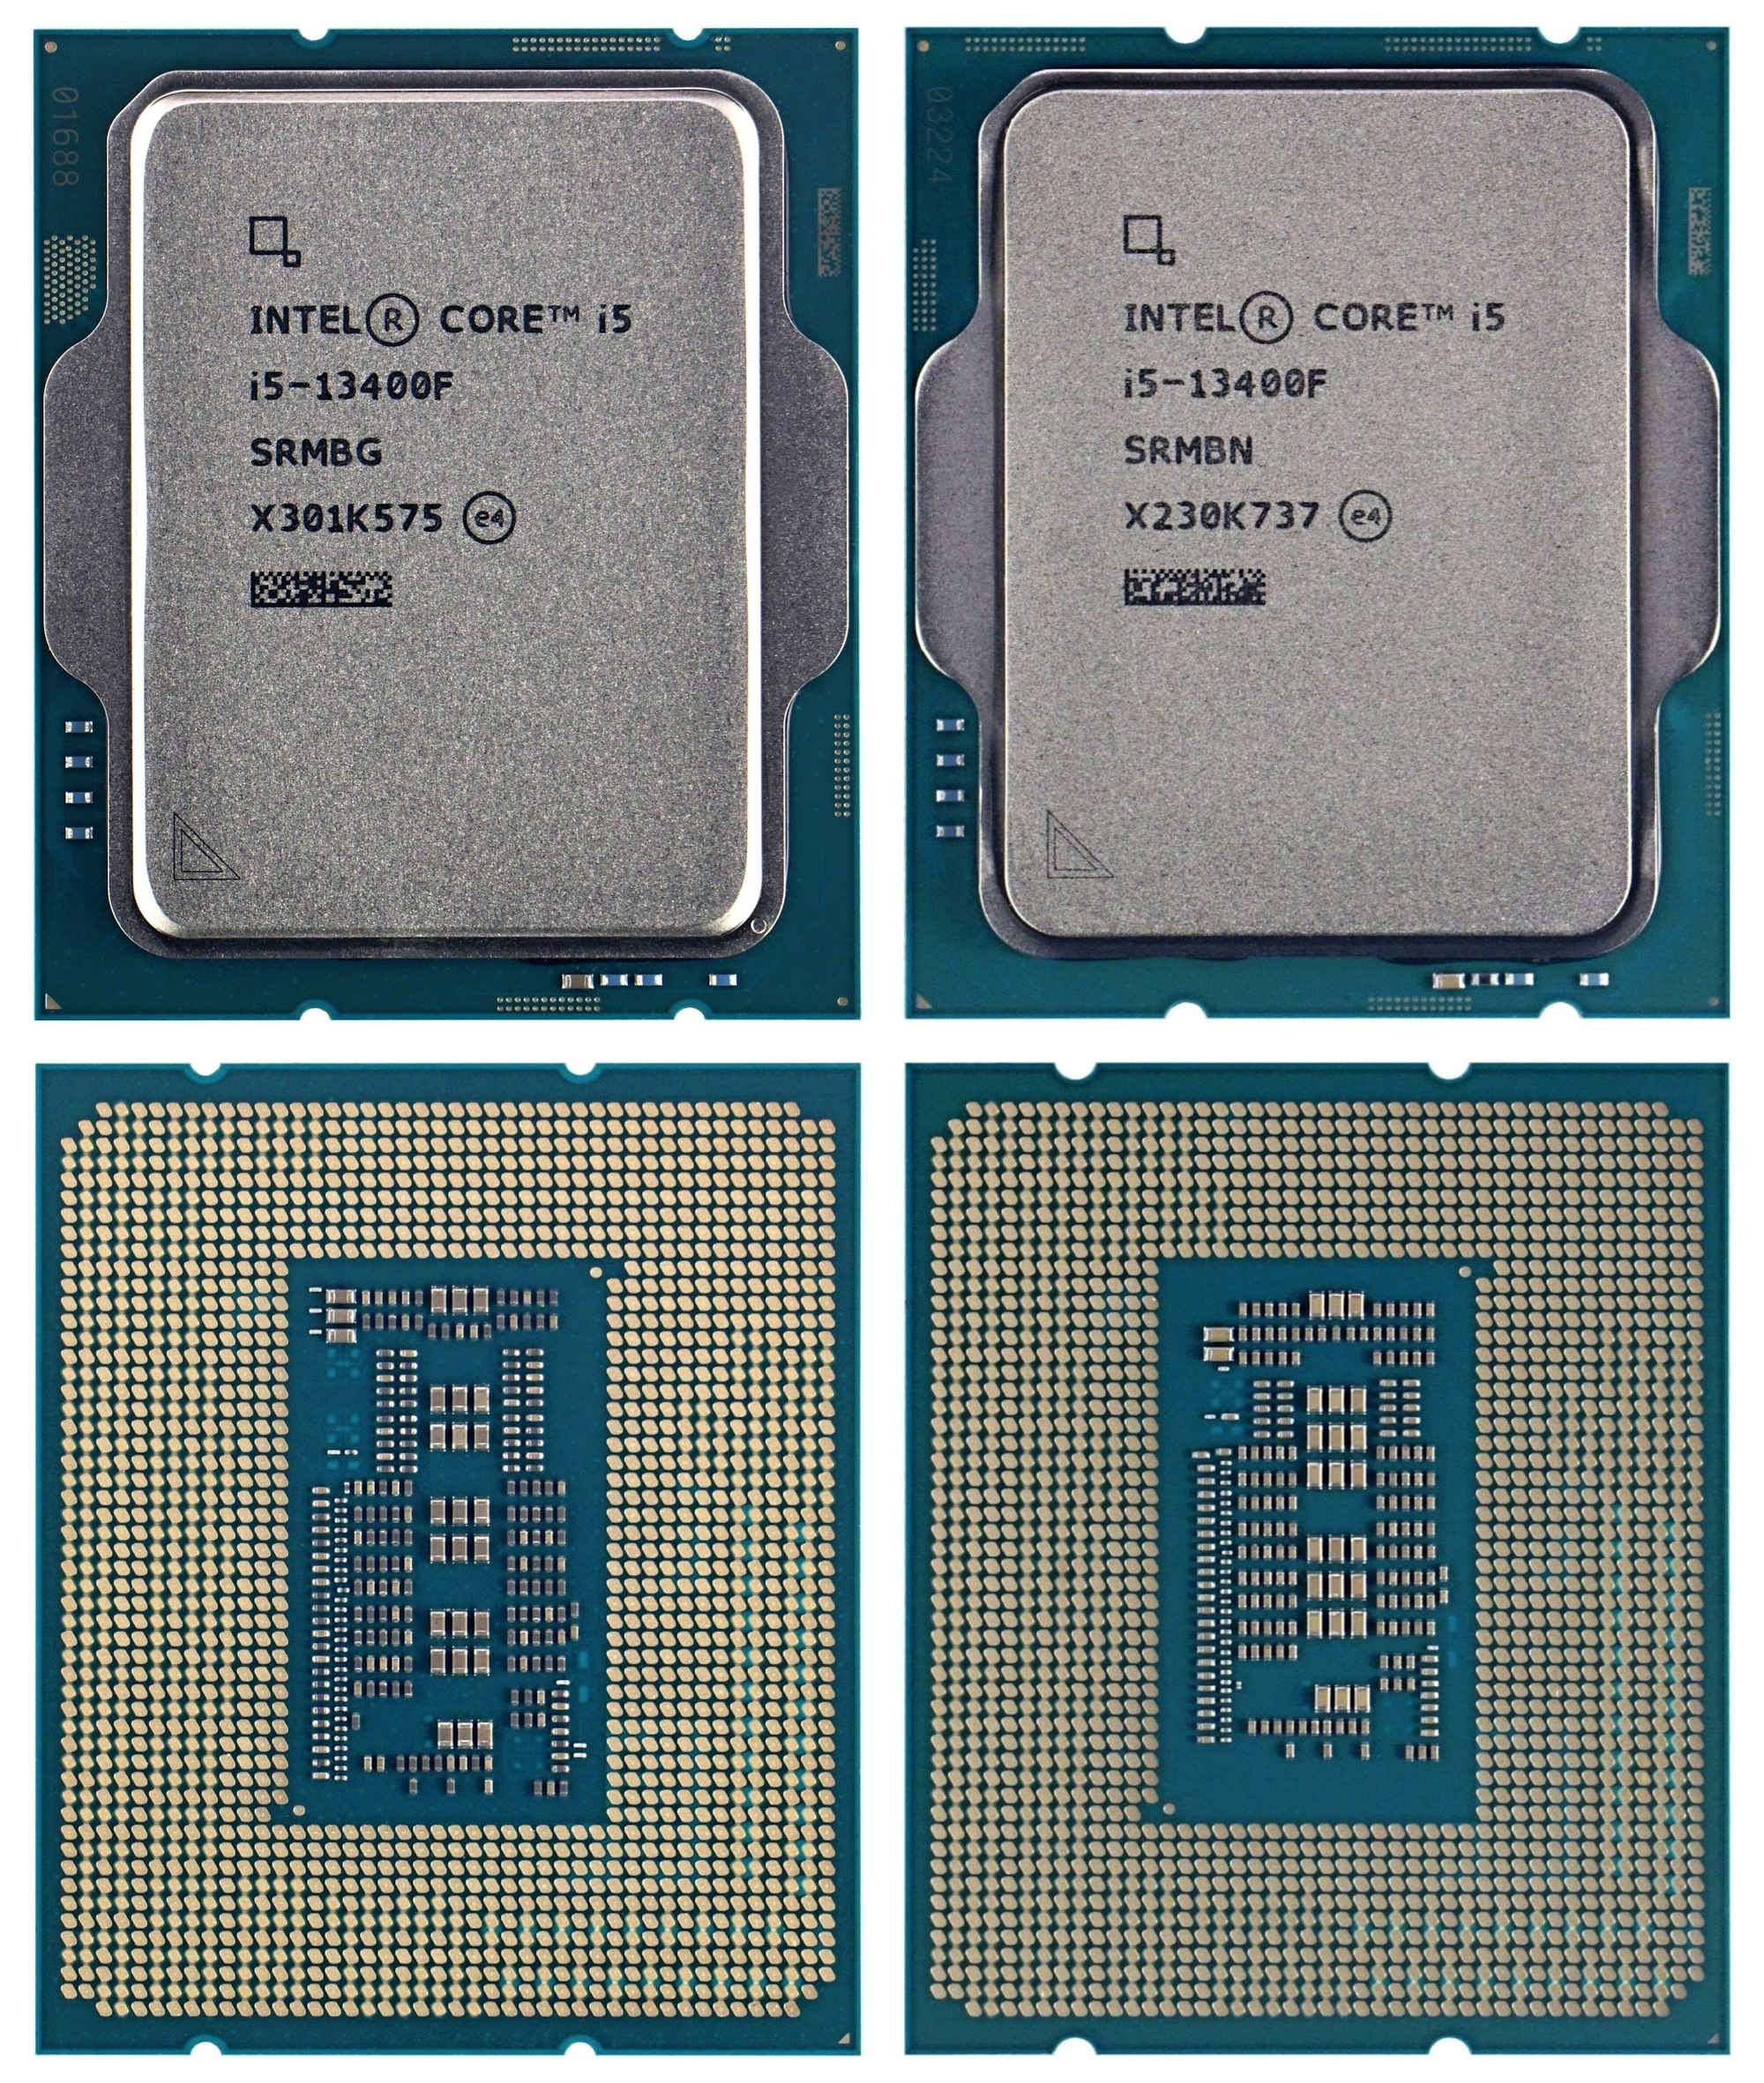 5 reasons to buy an Intel Core CPU for your next PC